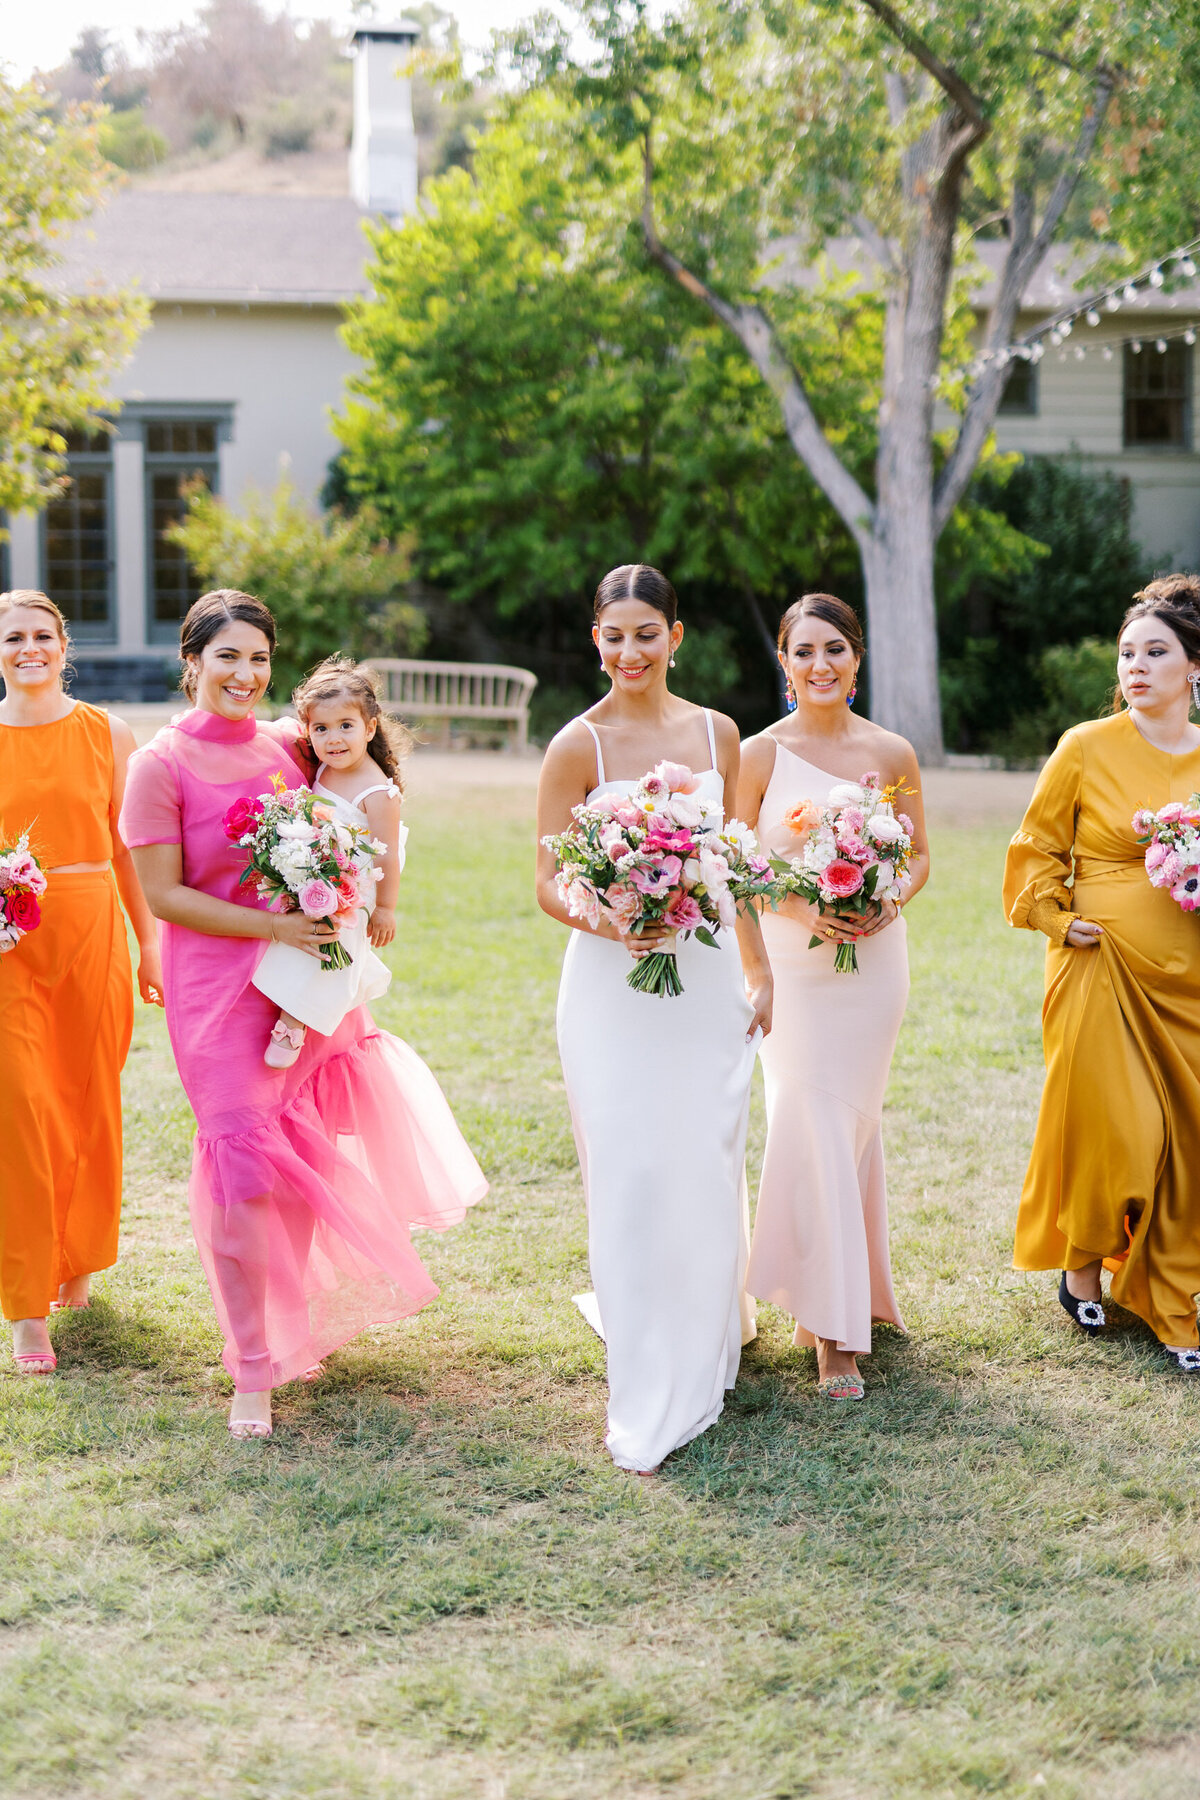 Angelica Marie Photography_Natalie Pirzad and Gordon Stewart Wedding_September 2022_The Lodge at Malibou Lake Wedding_Malibu Wedding Photographer_736